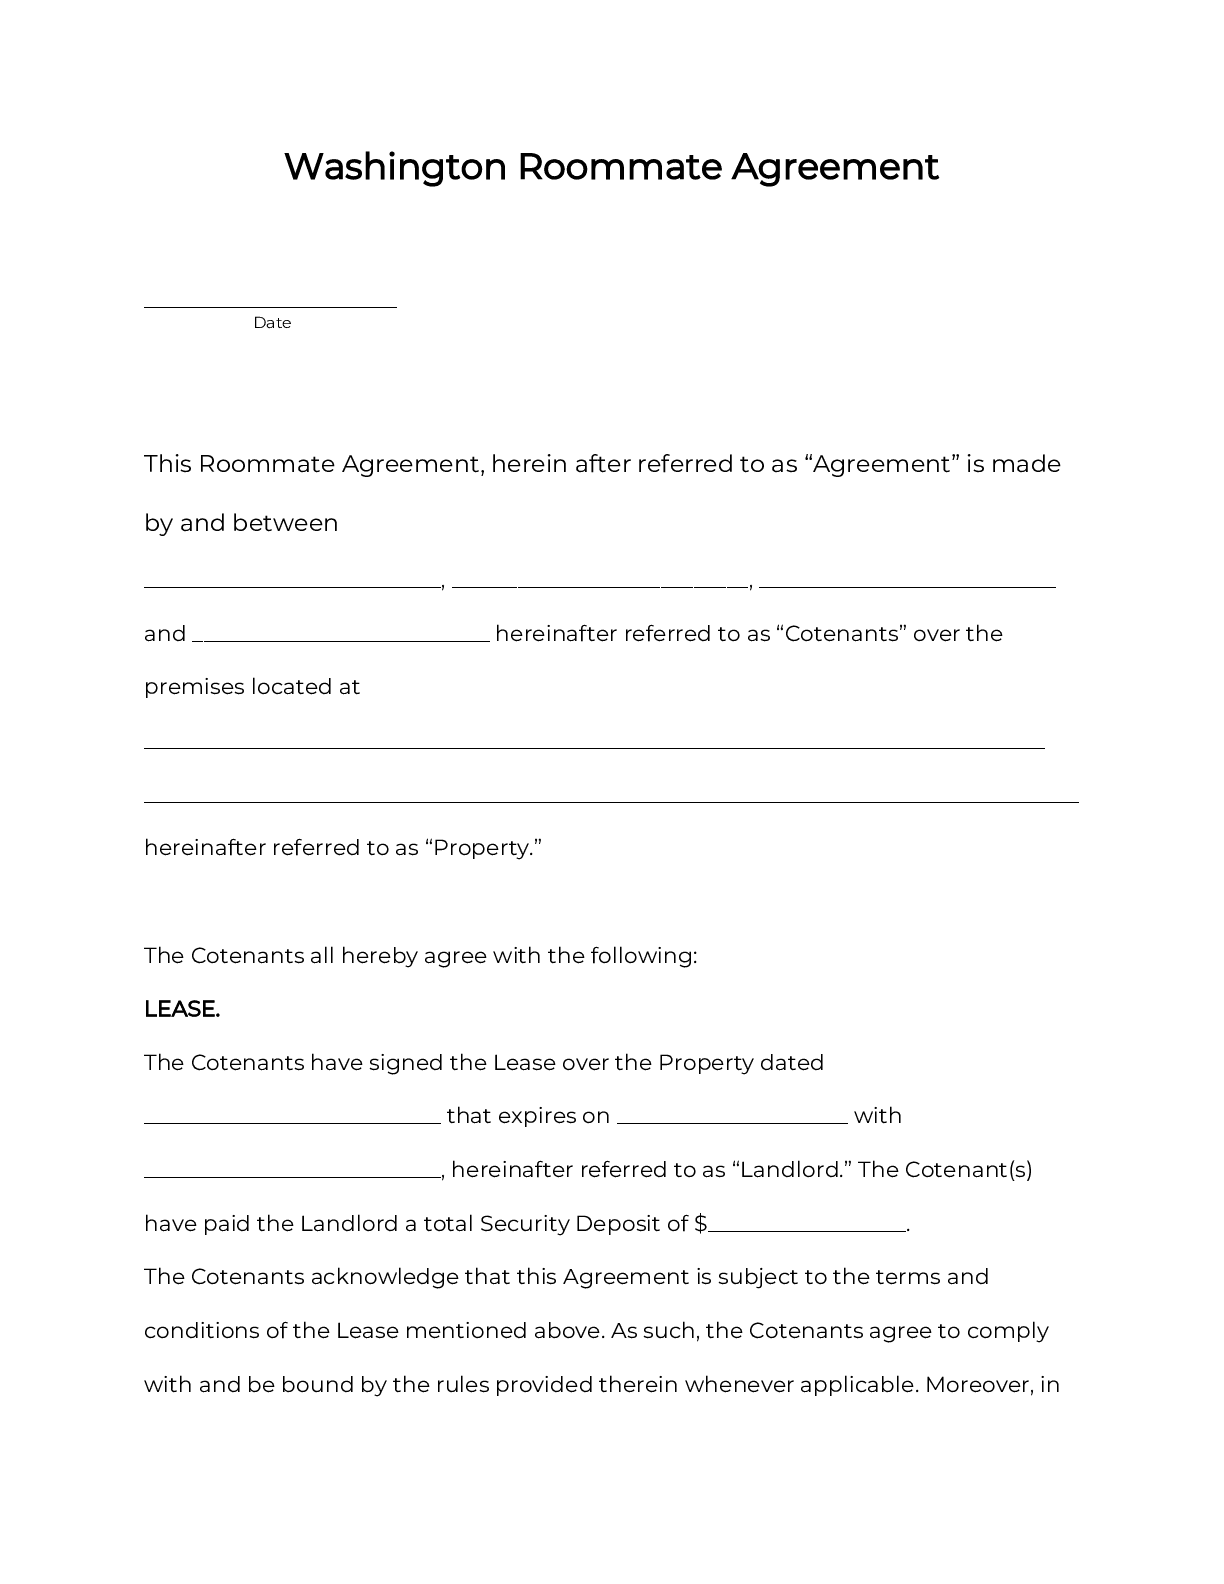 OFFICIAL Washington Roommate (Room Rental) Agreement [20] For house share tenancy agreement template